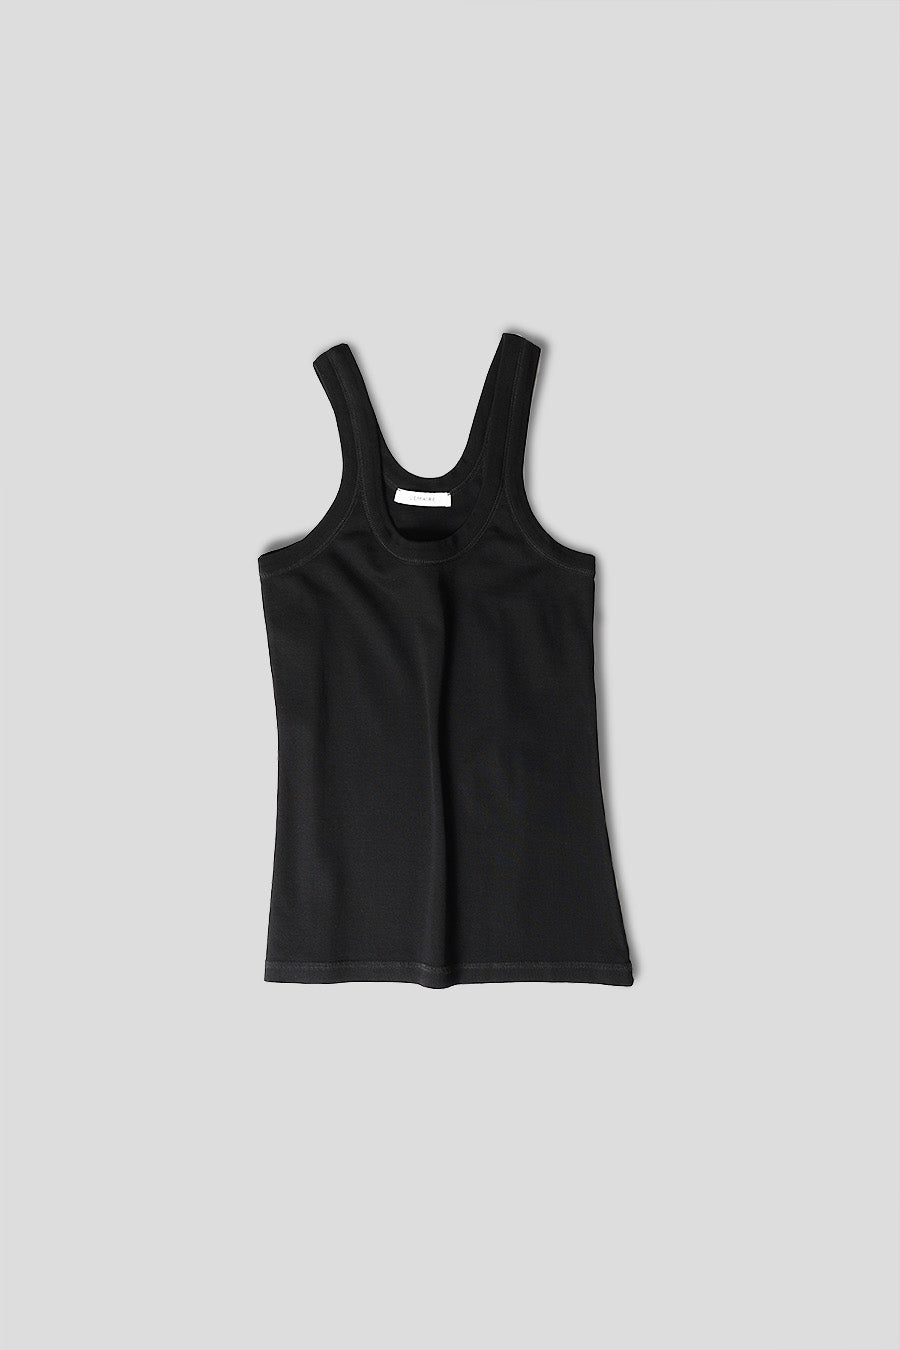 LEMAIRE - BLACK RIBBED TANK TOP - LE LABO STORE